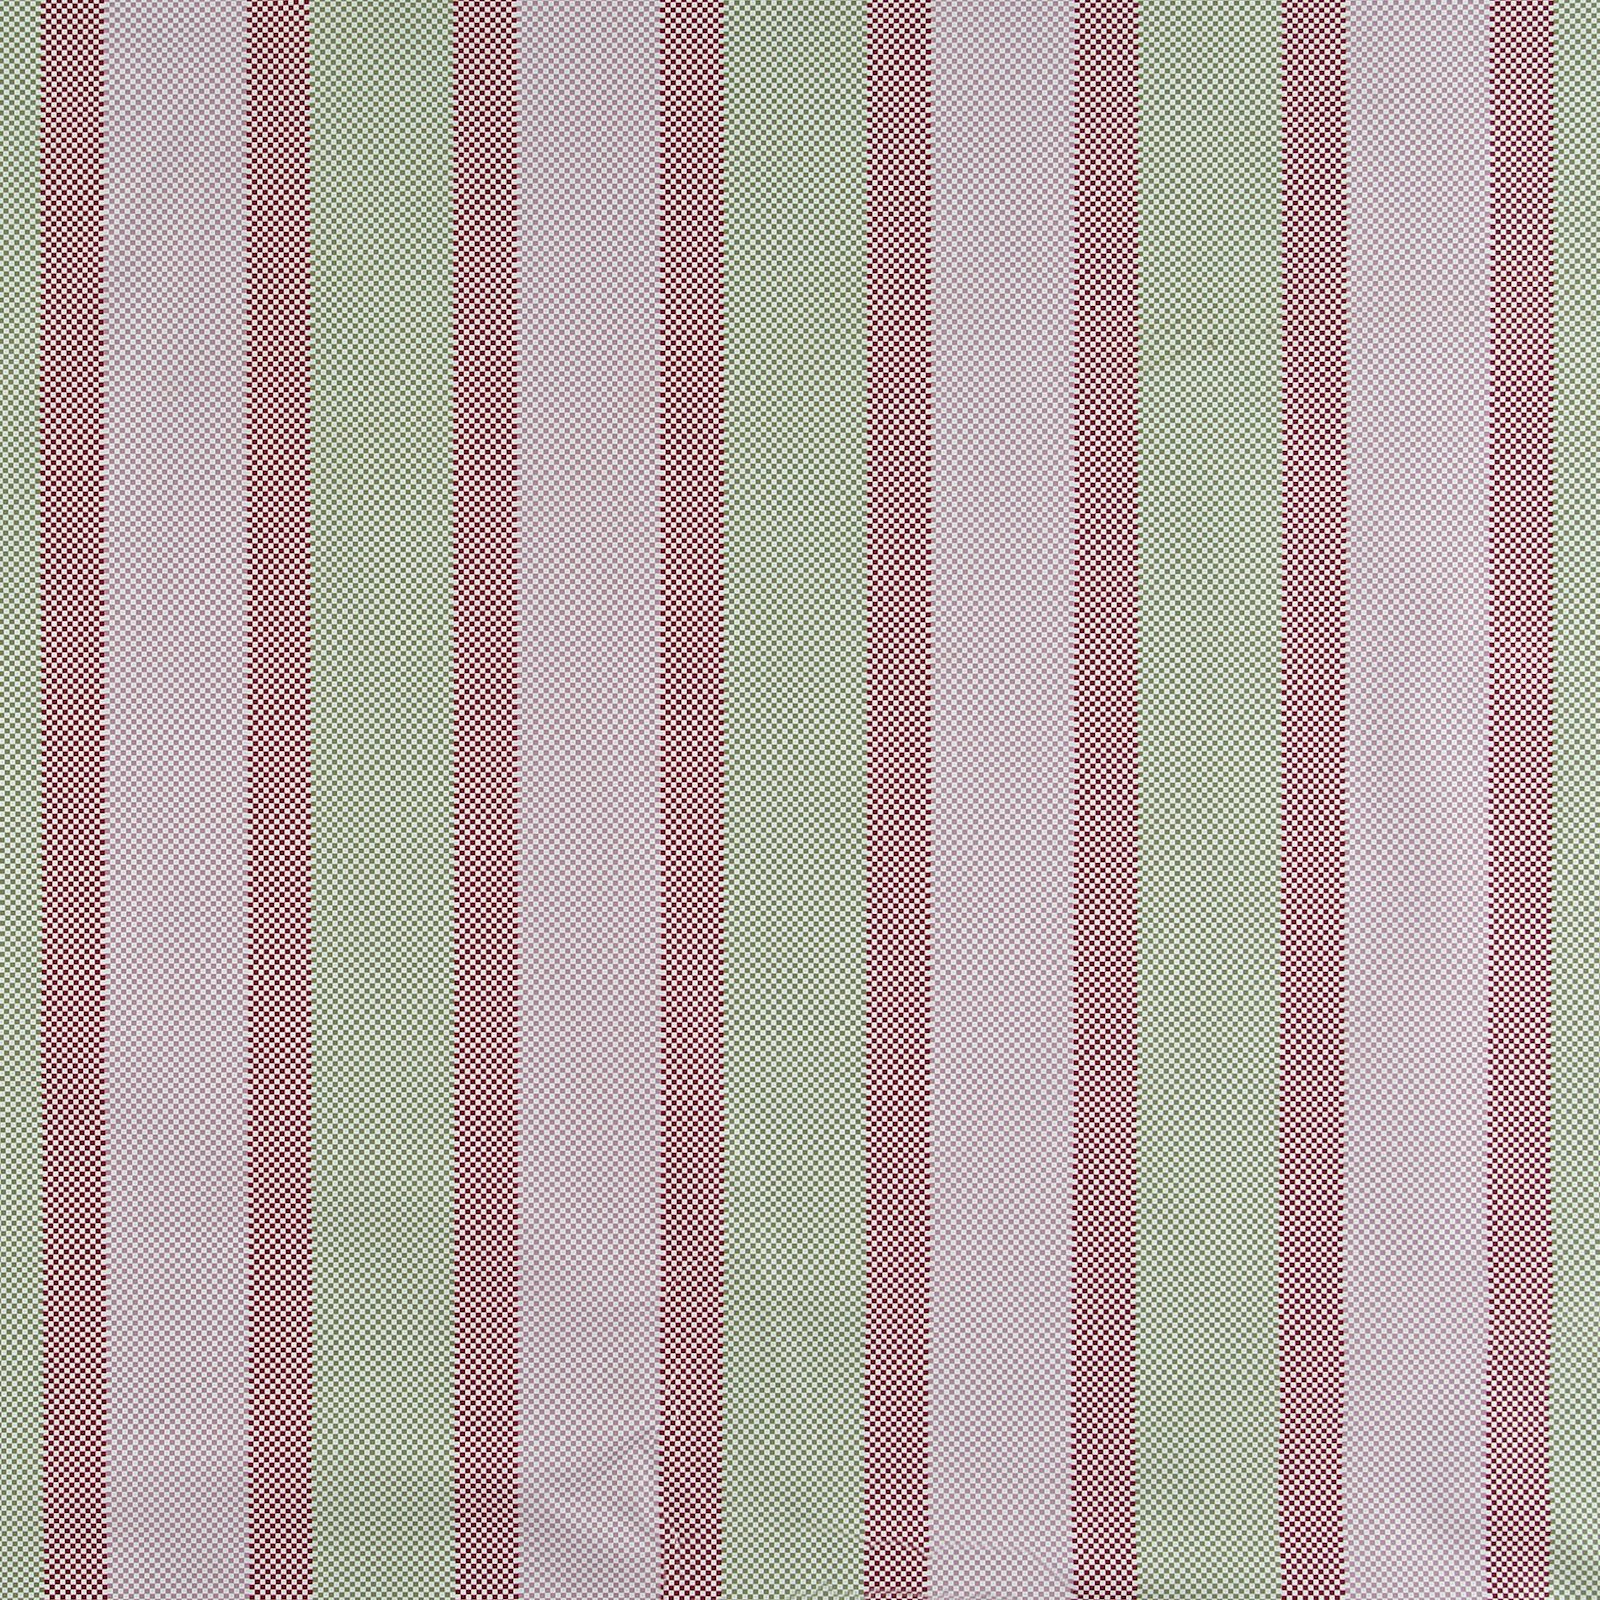 Non-woven oilcloth green/violet stripes 866123_pack_sp